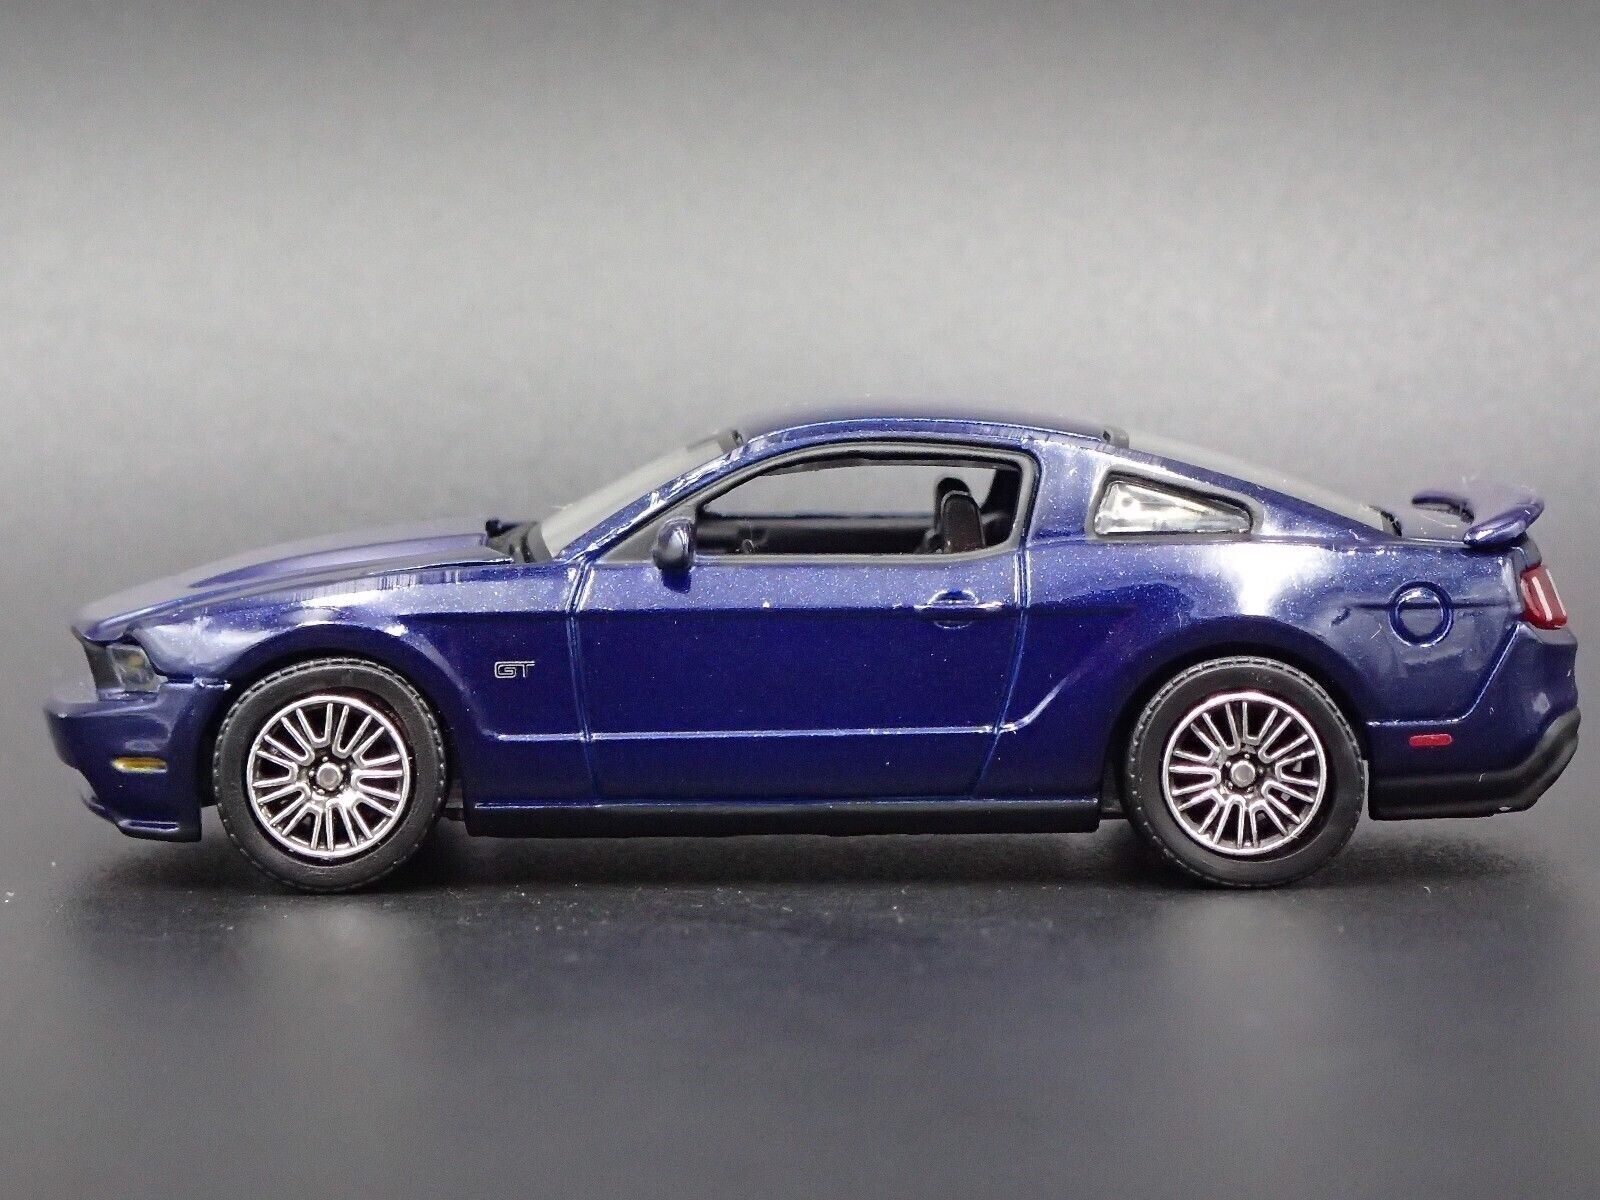 2010-2014 FORD MUSTANG GT RARE 1/64 SCALE COLLECTIBLE DIORAMA DIECAST MODEL CAR